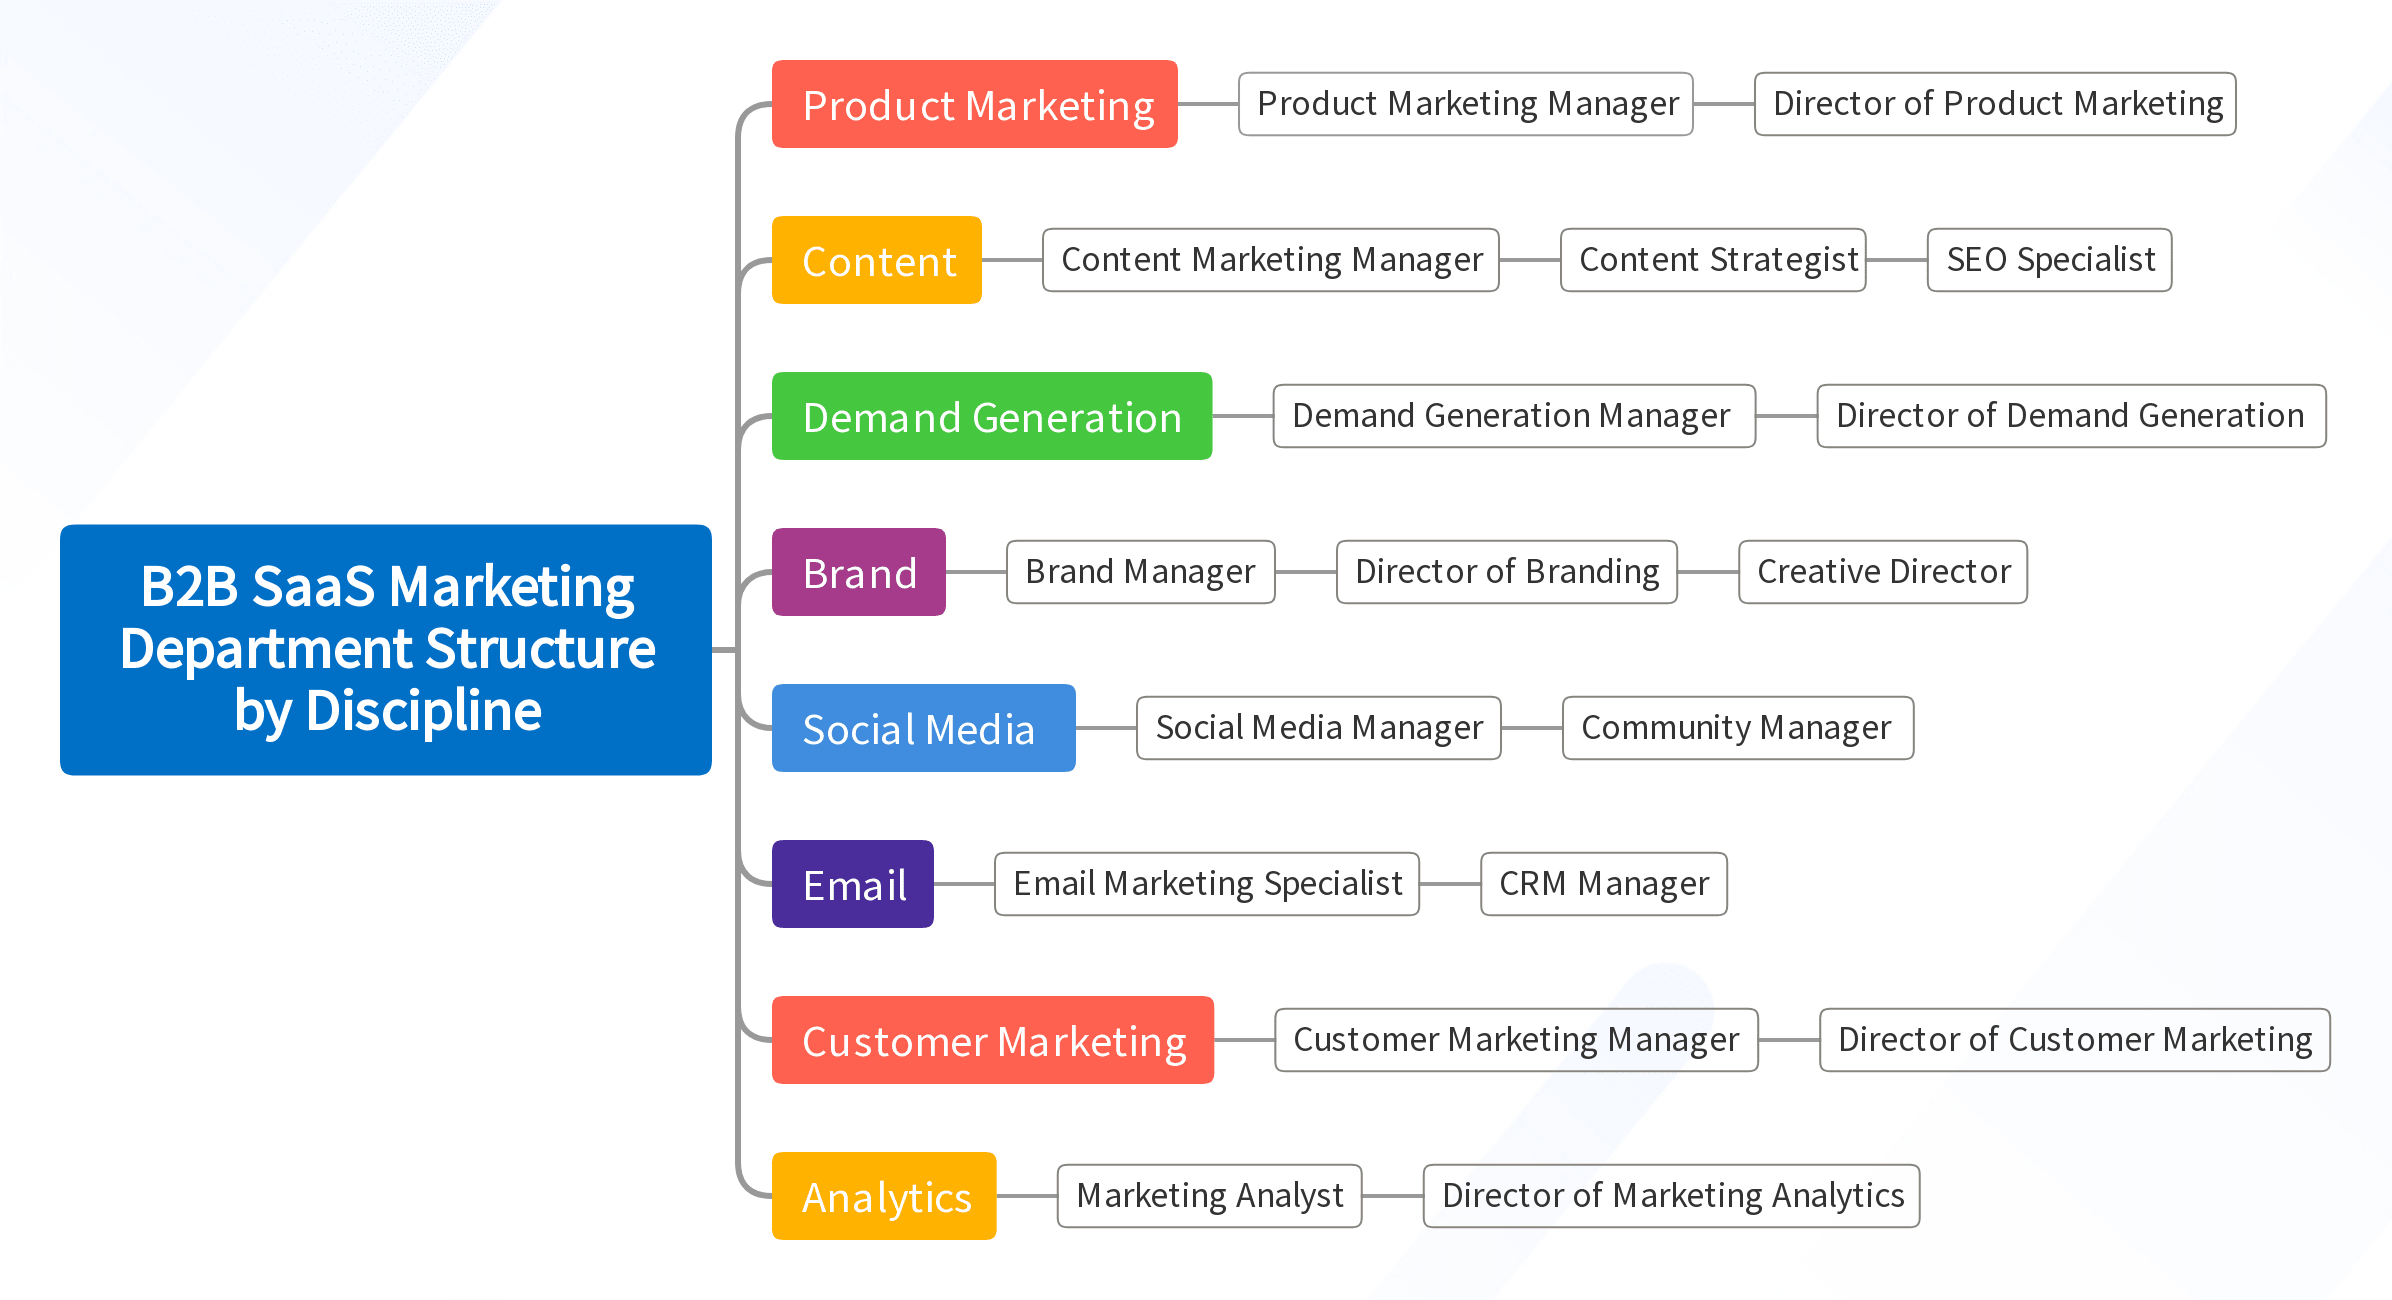 B2B SaaS Marketing Department Structure by Discipline